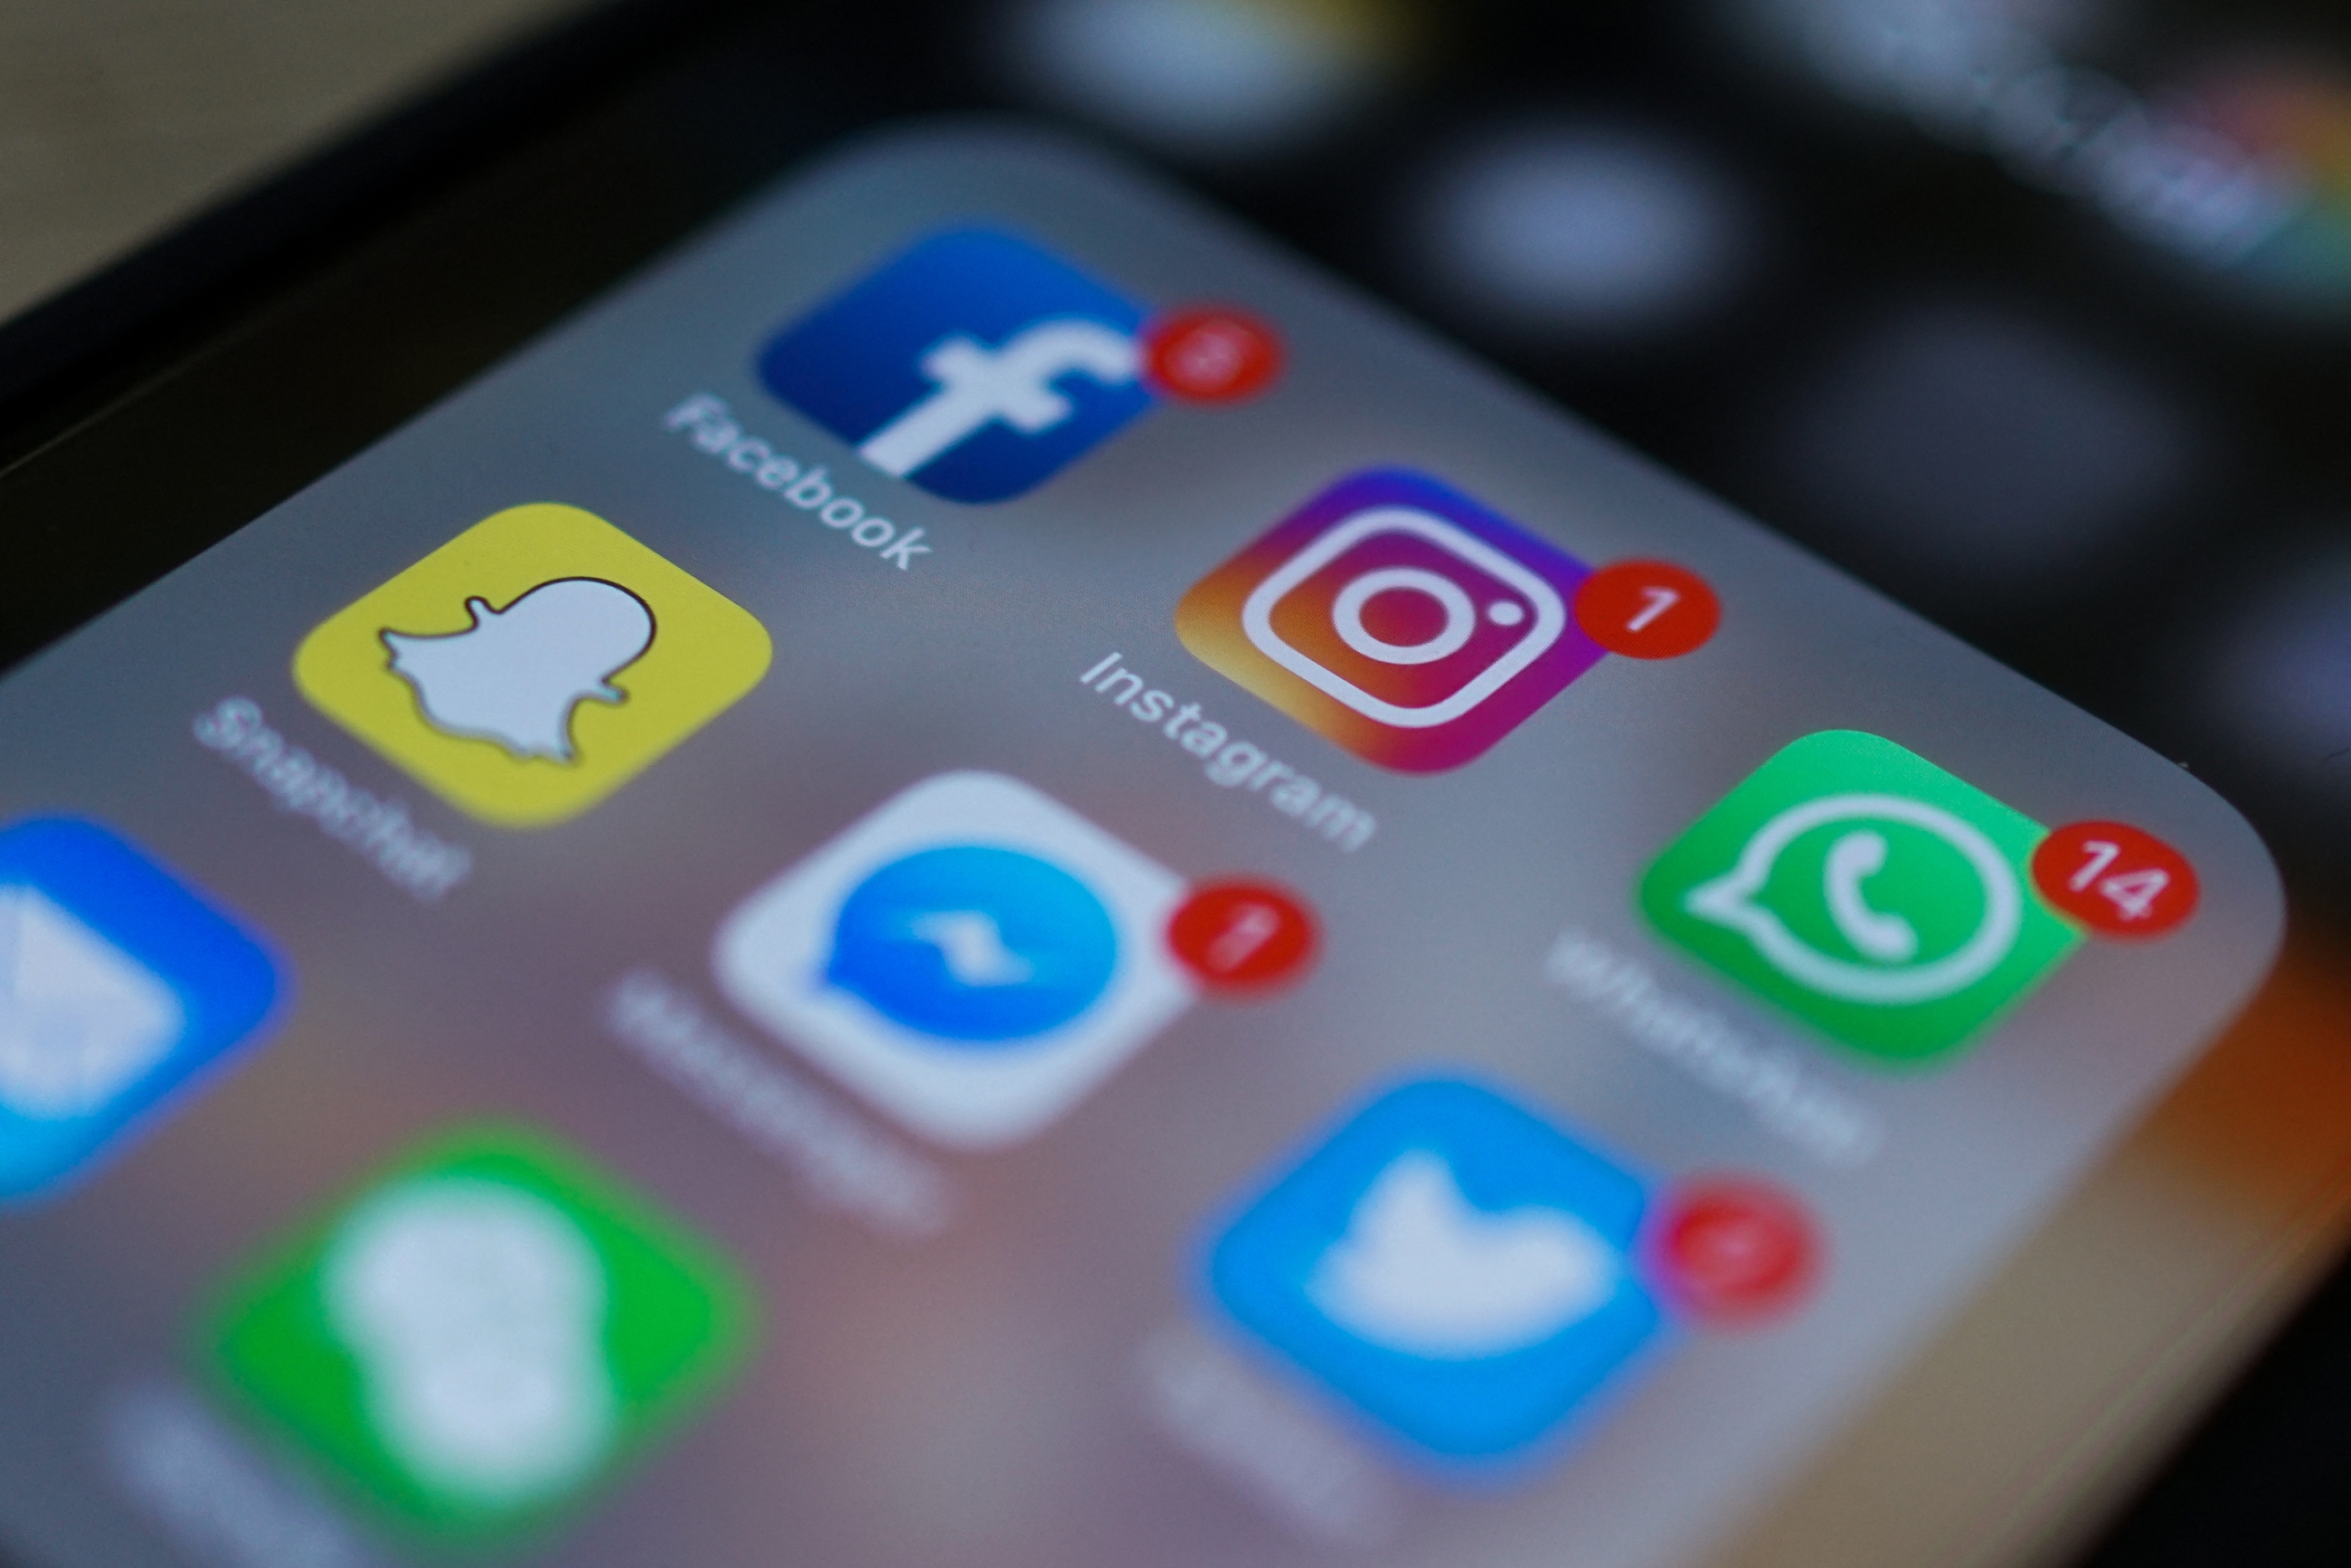 Users accused Instagram of active censorship, with many surprised upon realising the newly imposed limitations on their feed (AFP)